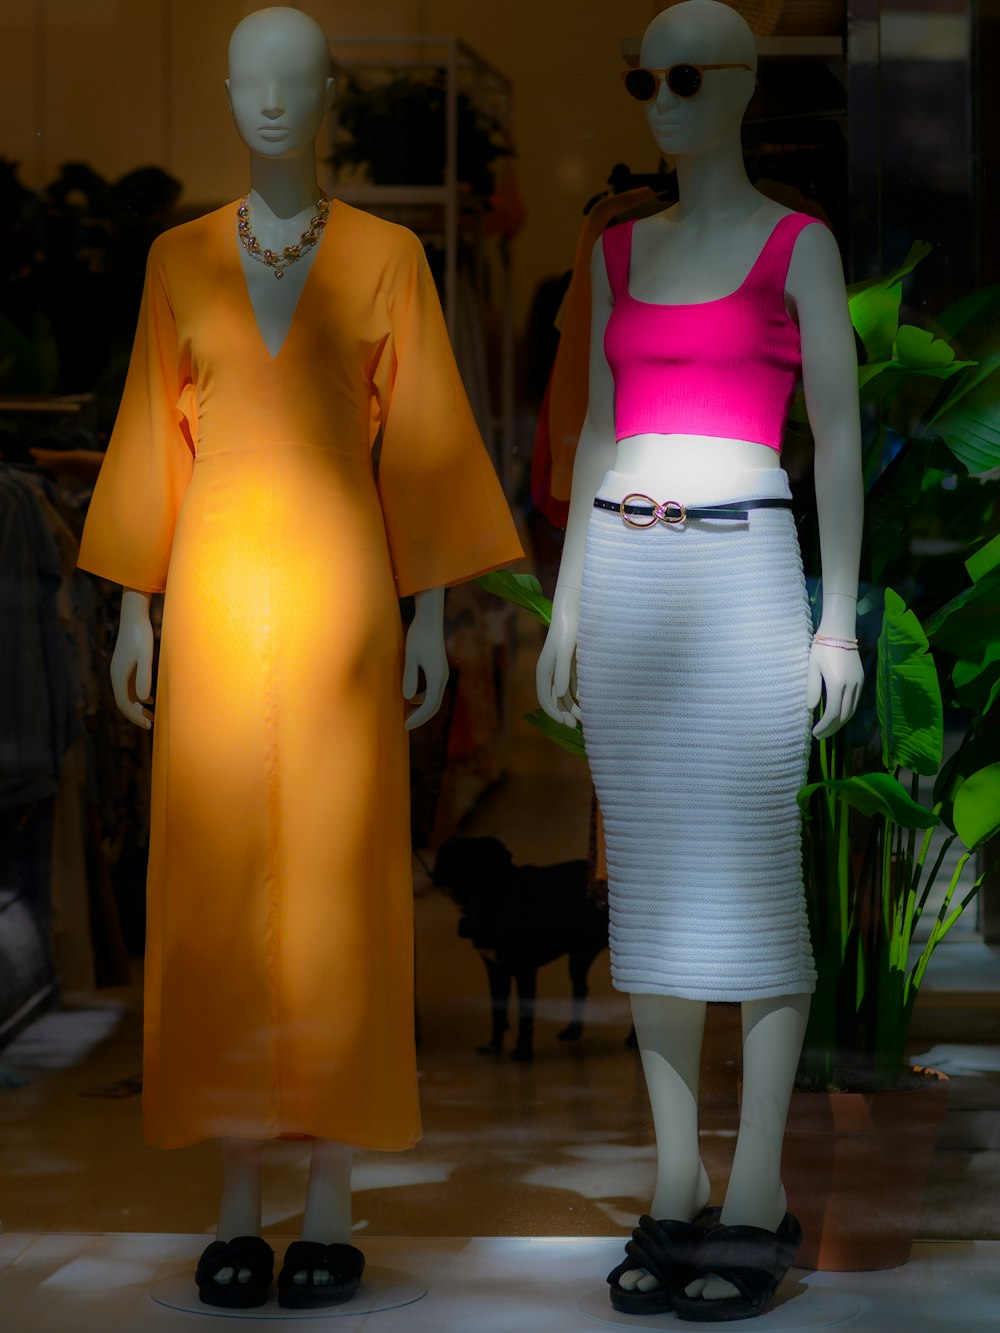 a couple of mannequins wearing clothing